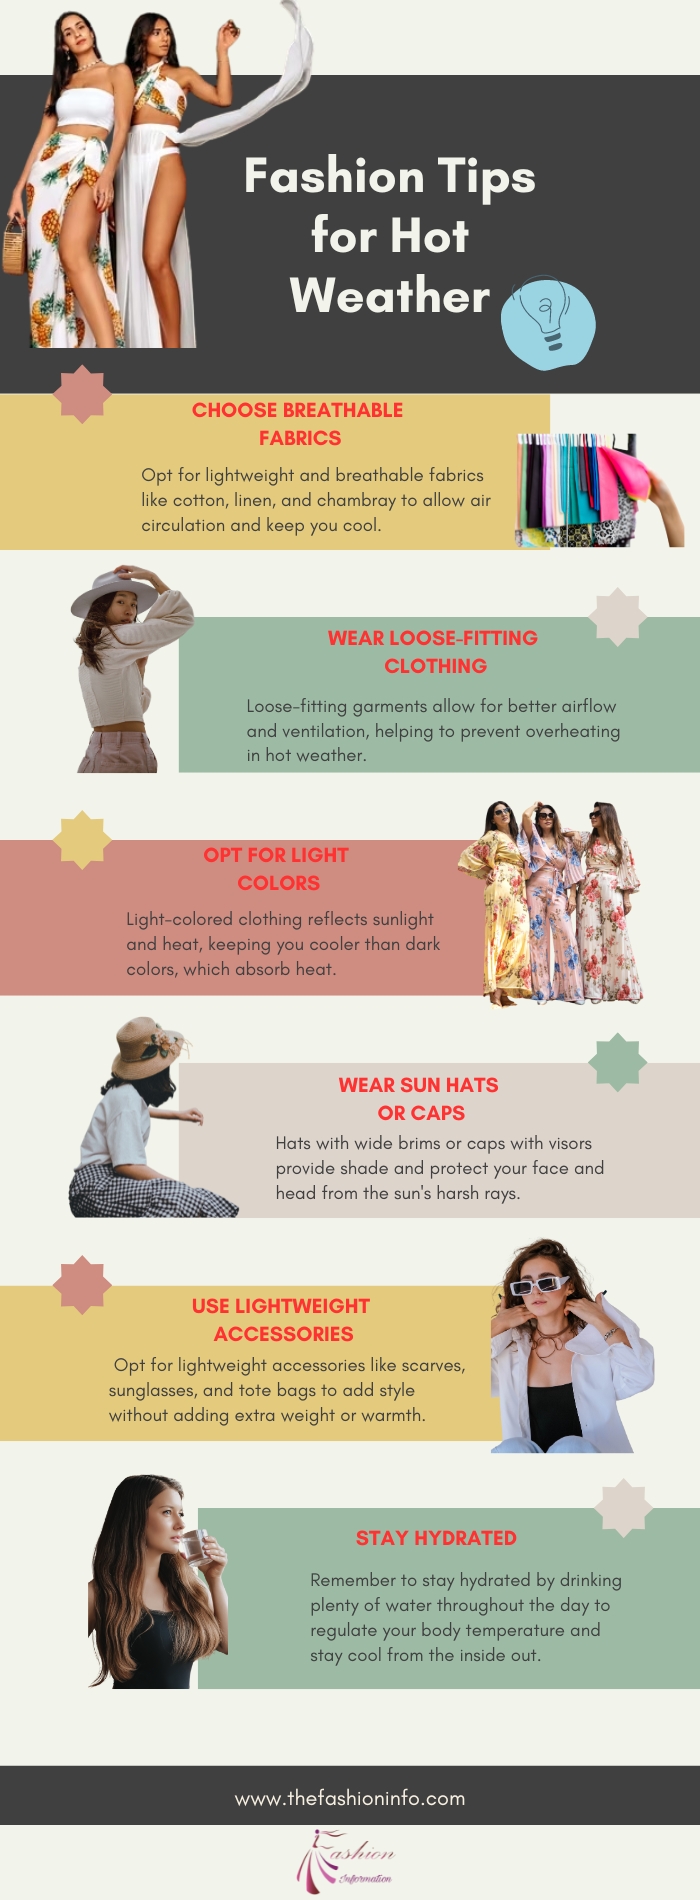 Fashion Tips for Hot Weather